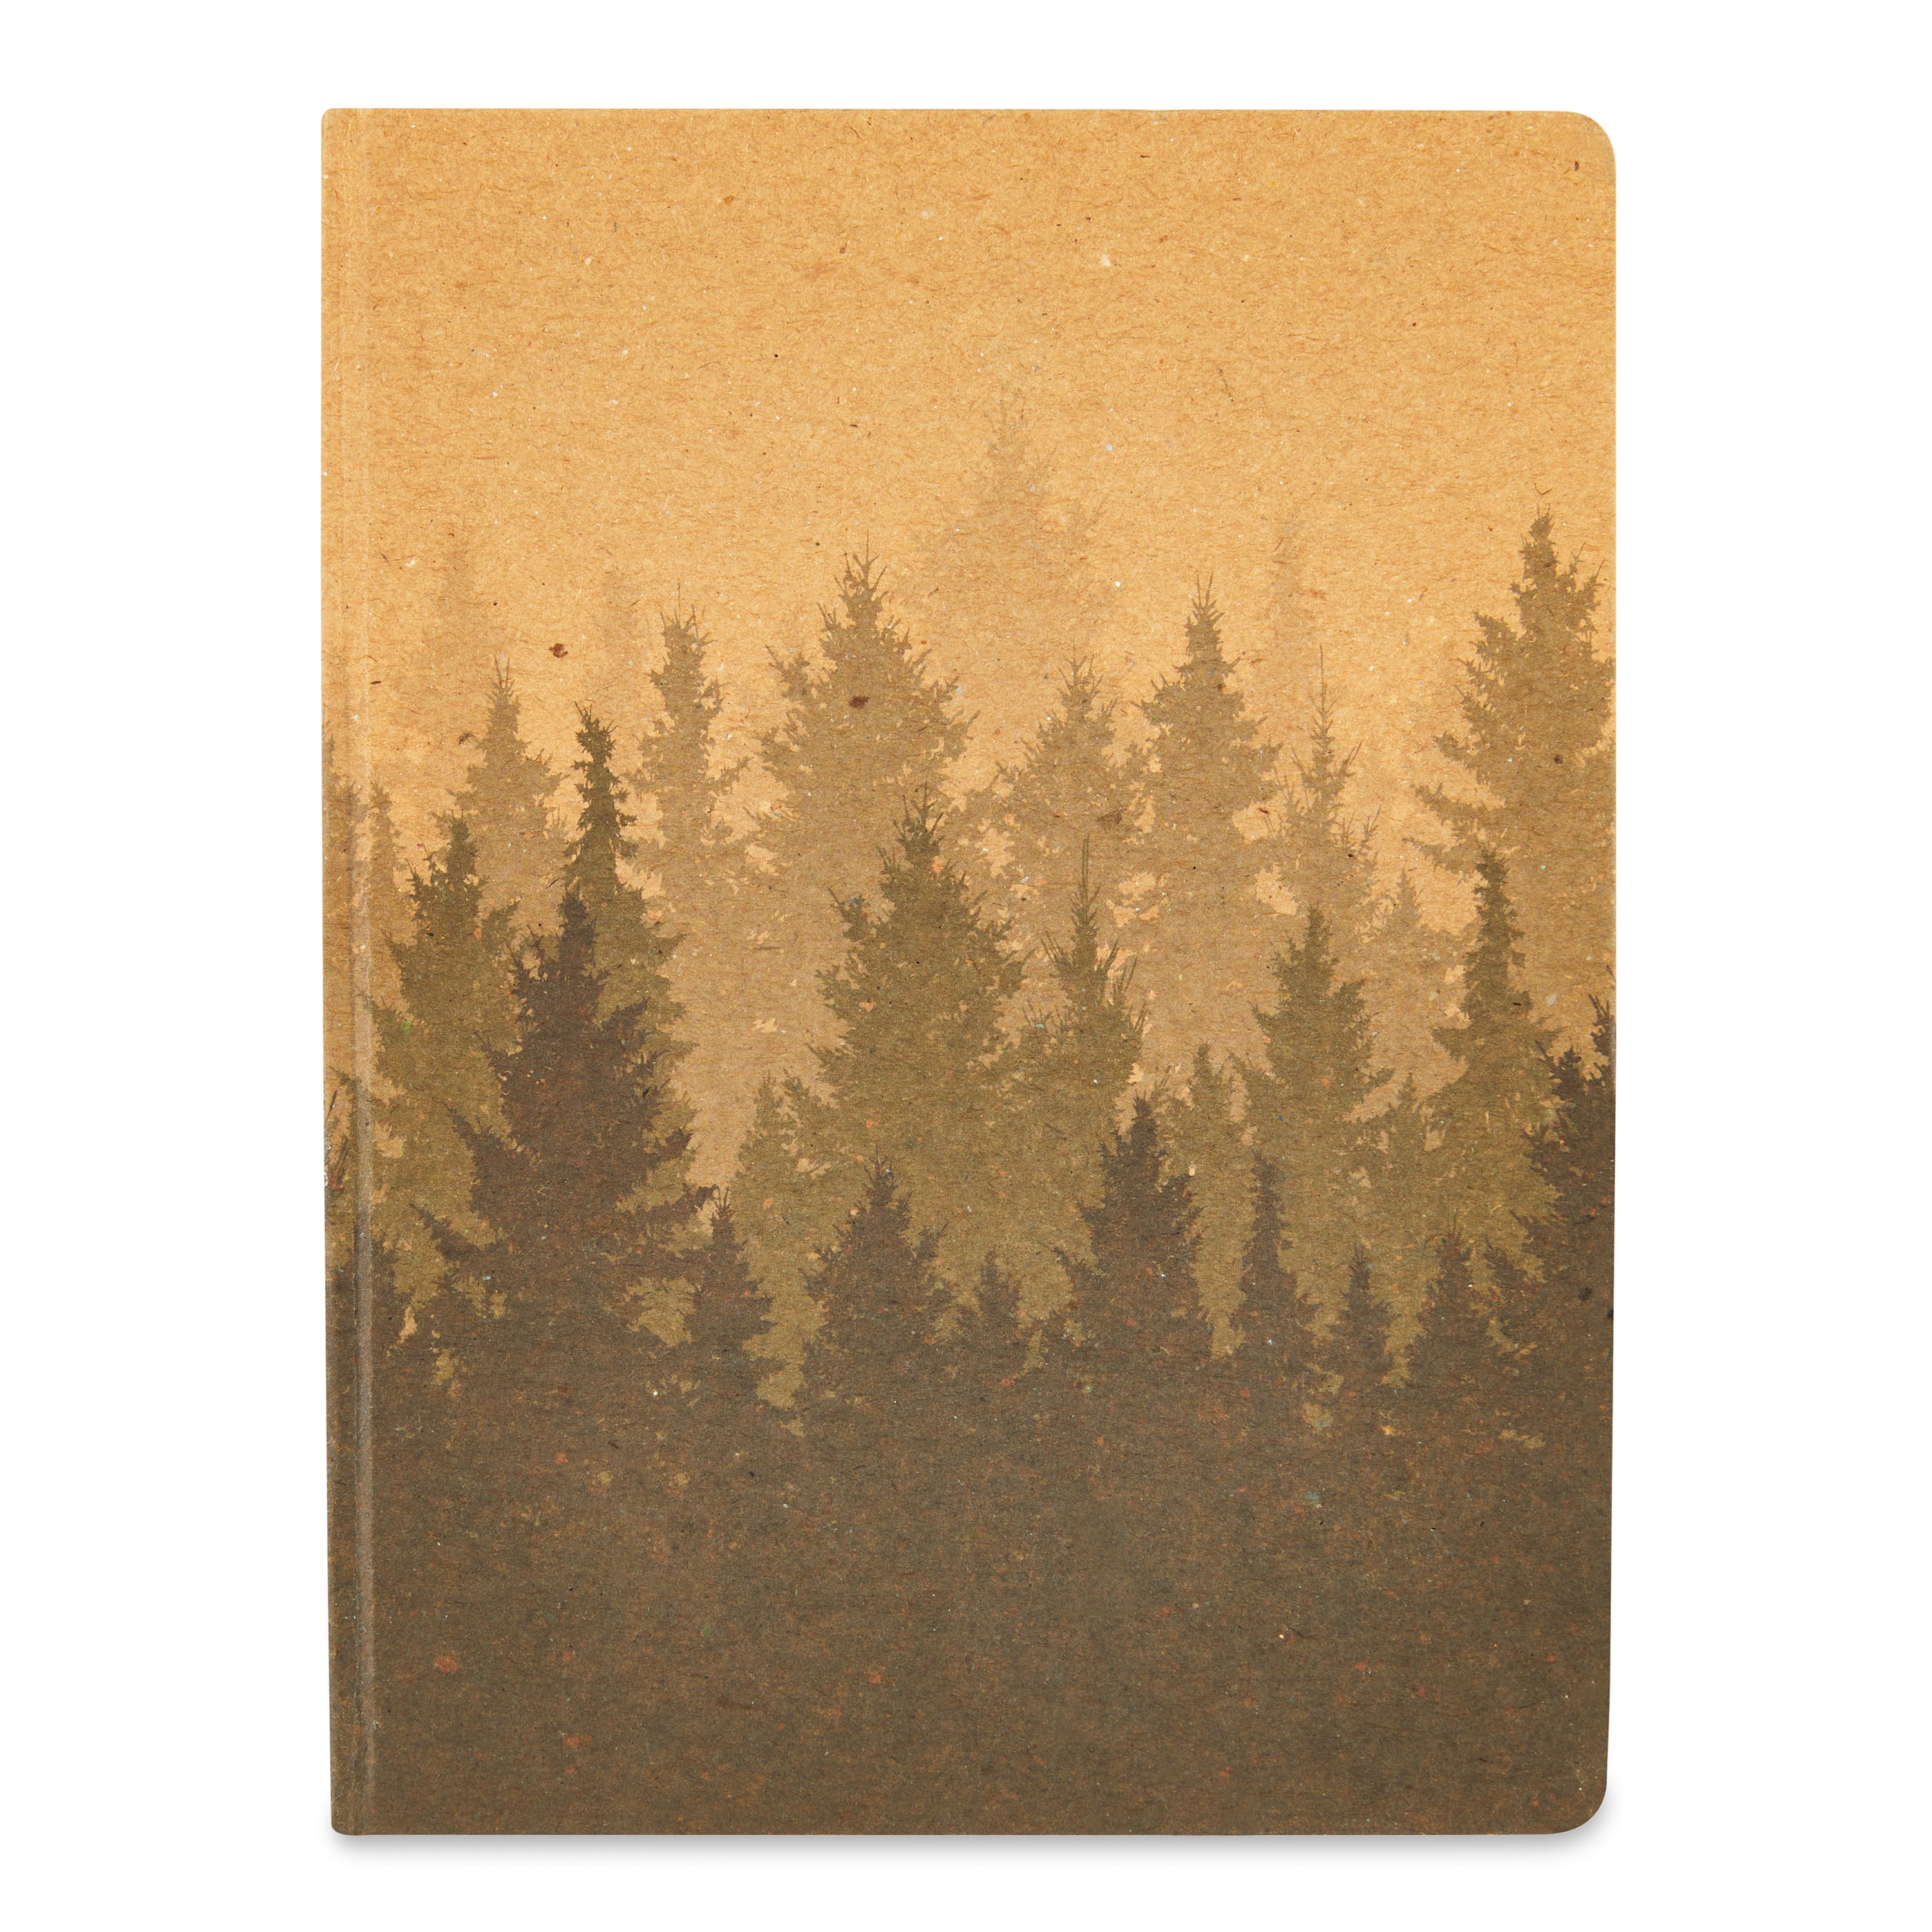 Pen+Gear Hardcover Paper Journal, Forest Design Cover, 192 Ruled Pages